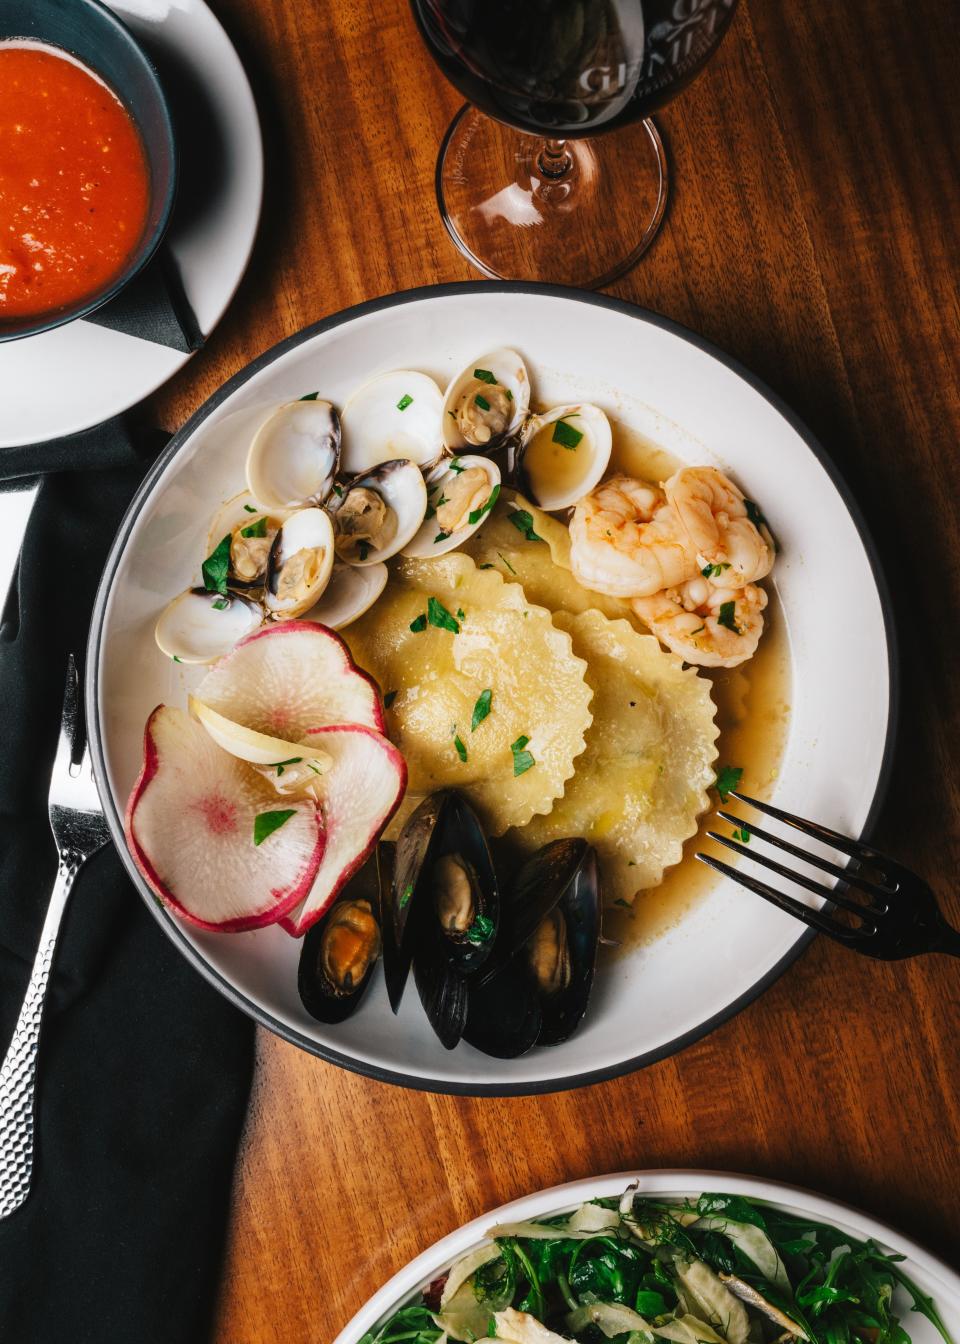 Gemelli's Feast of the Seven Fishes holiday dinner will be on Dec. 21 in West Asheville.